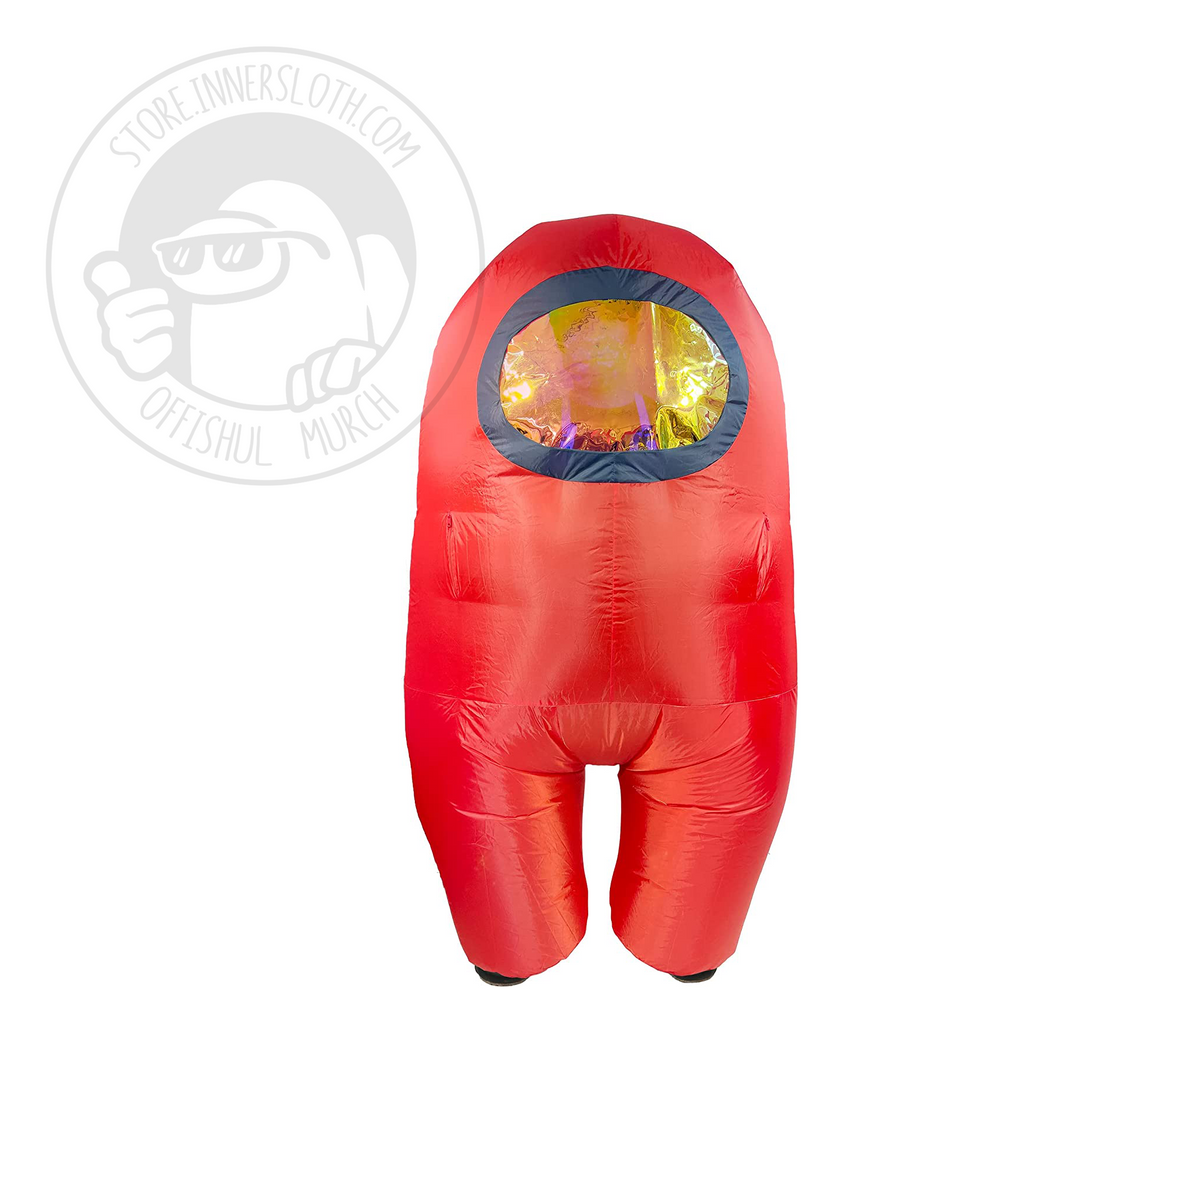 Front view of the Red inflatable Crewmate costume.